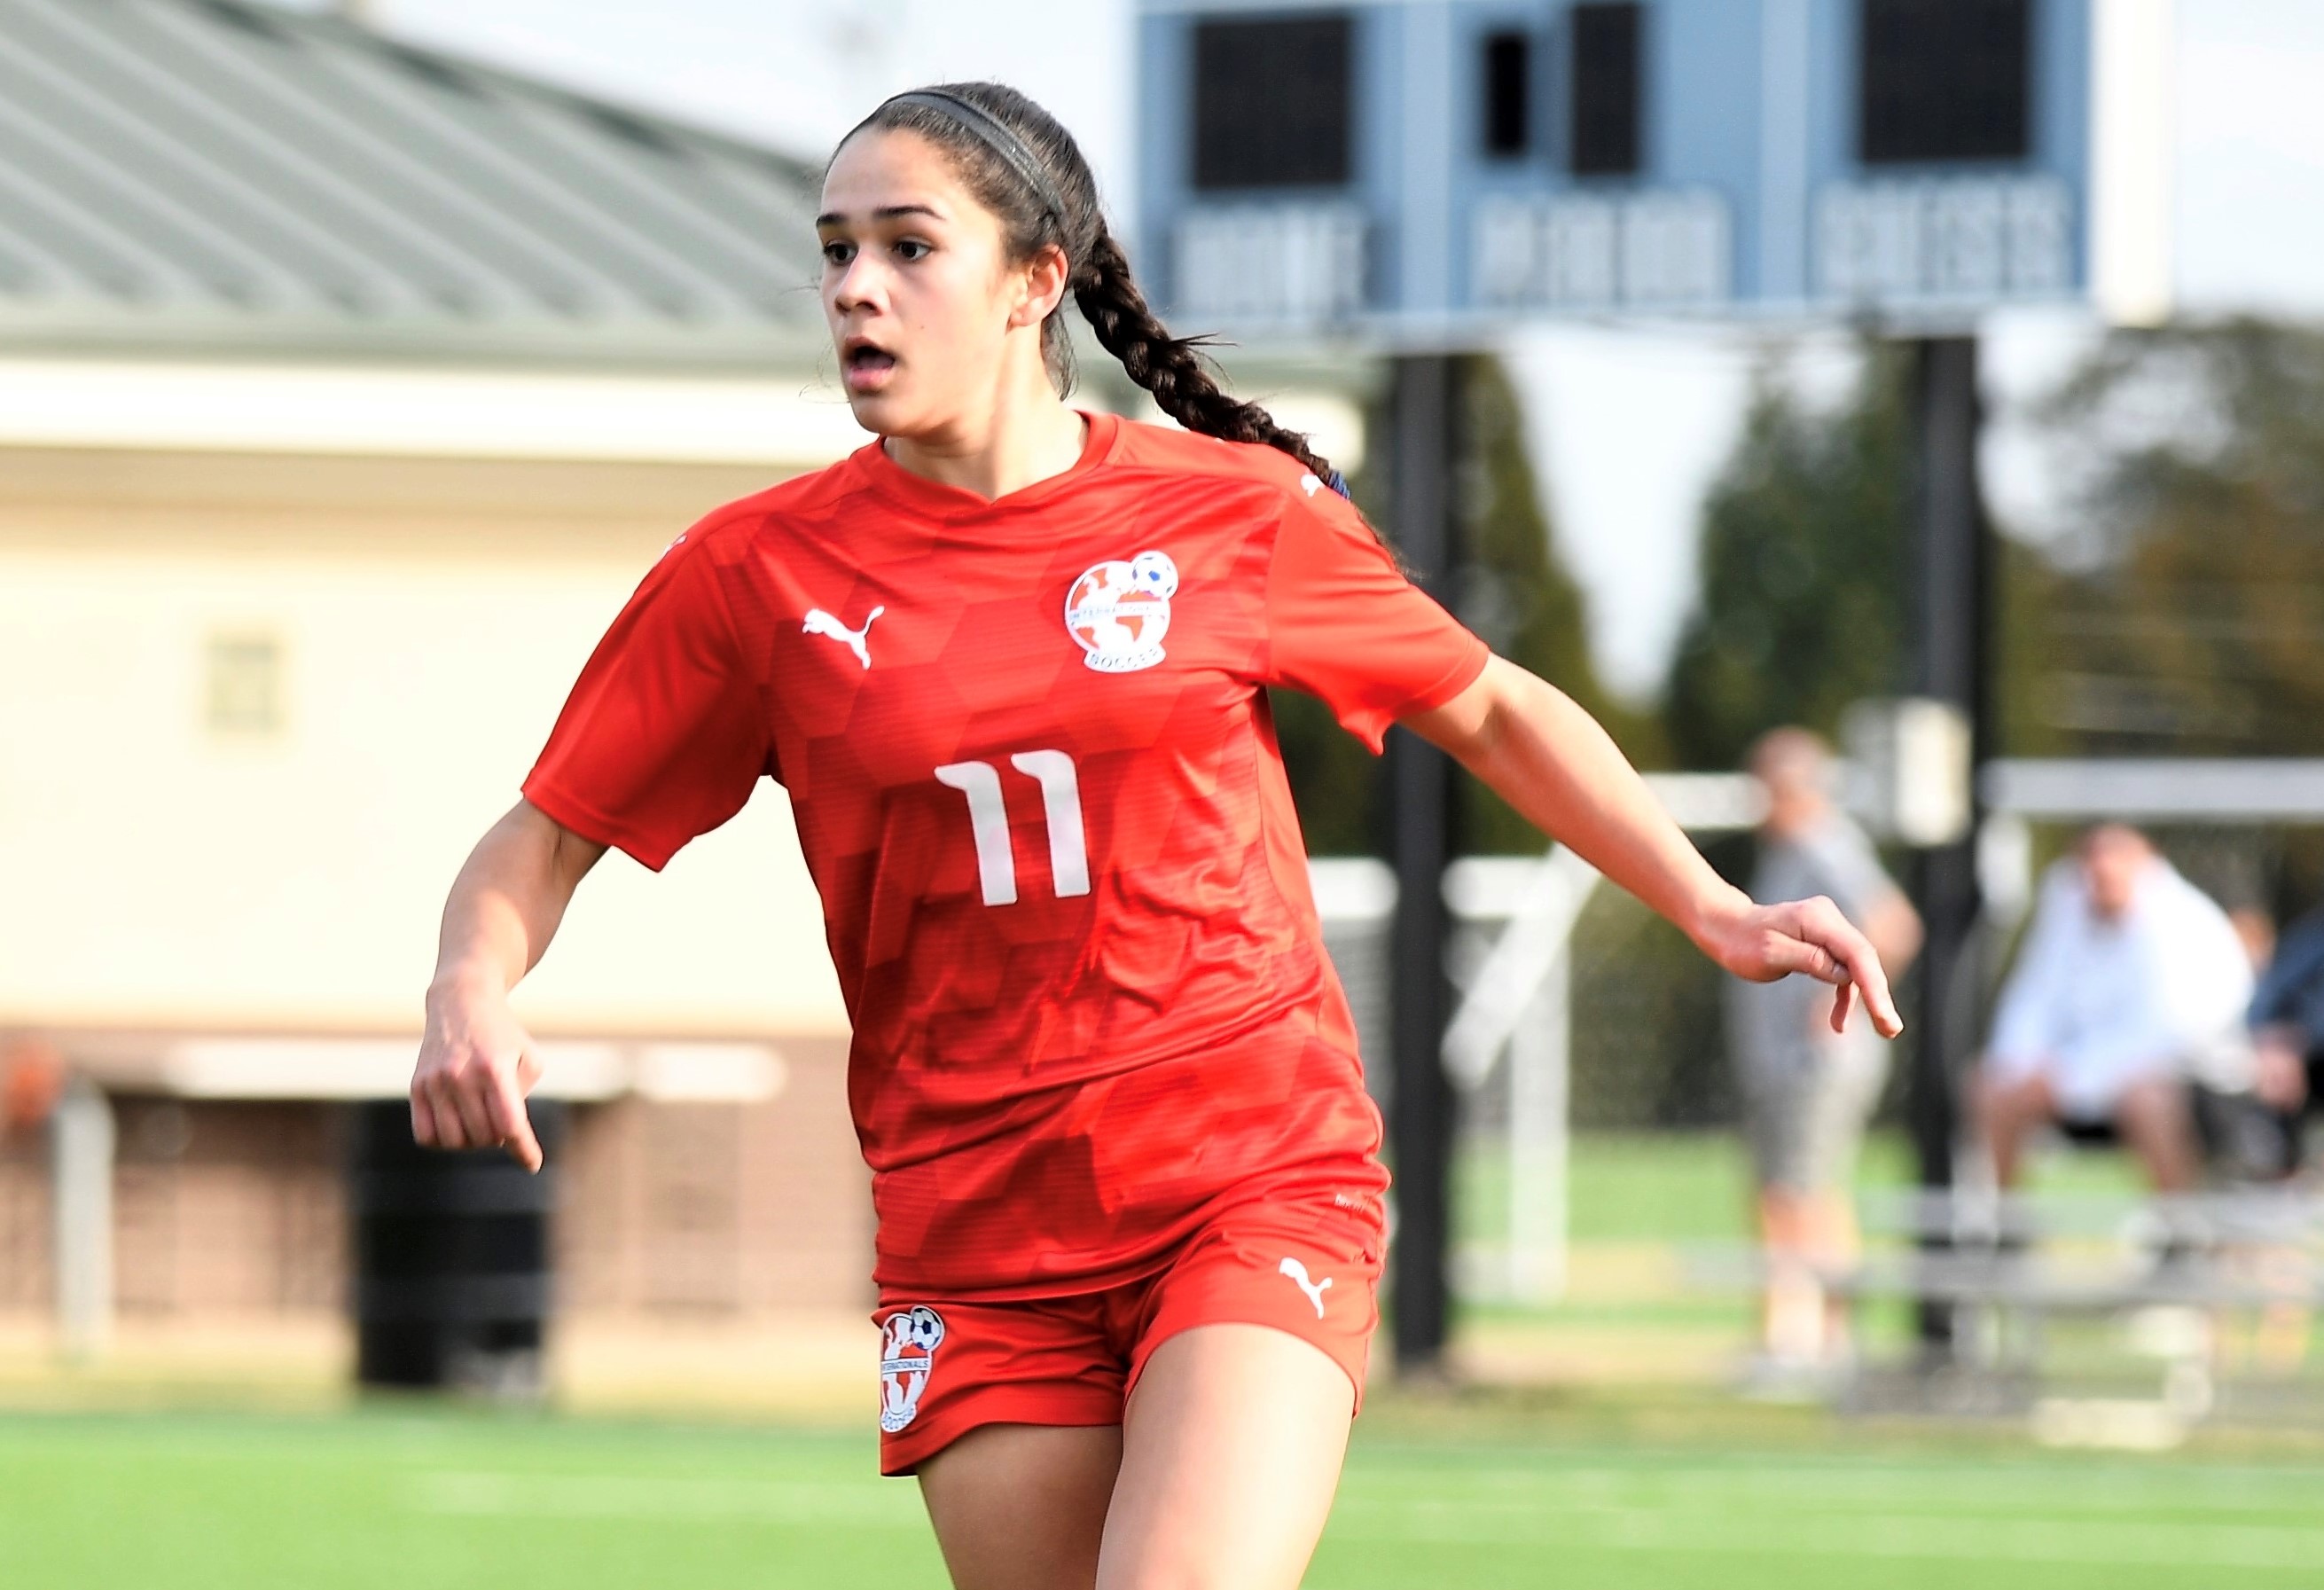 Mt. Lebanon’s Mia Bhuta named to USWNT U17 roster for 2022 CONCACAF Women’s U-17 Championship